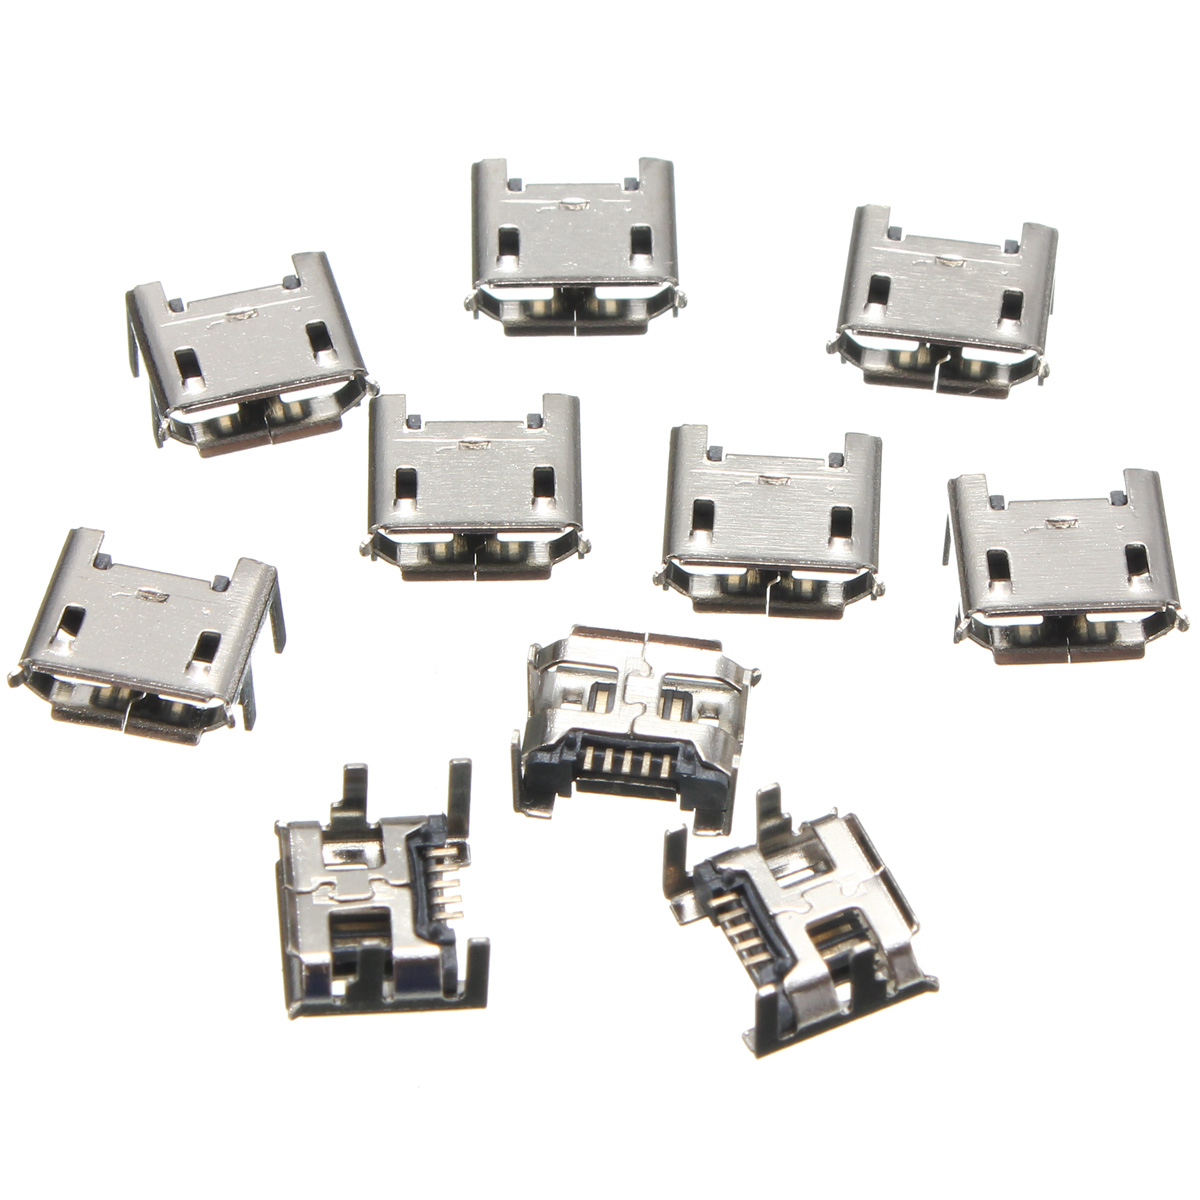 

200pcs Micro USB Type B 5 Pin Female Socket 4 Vertical Legs For Solder Connector